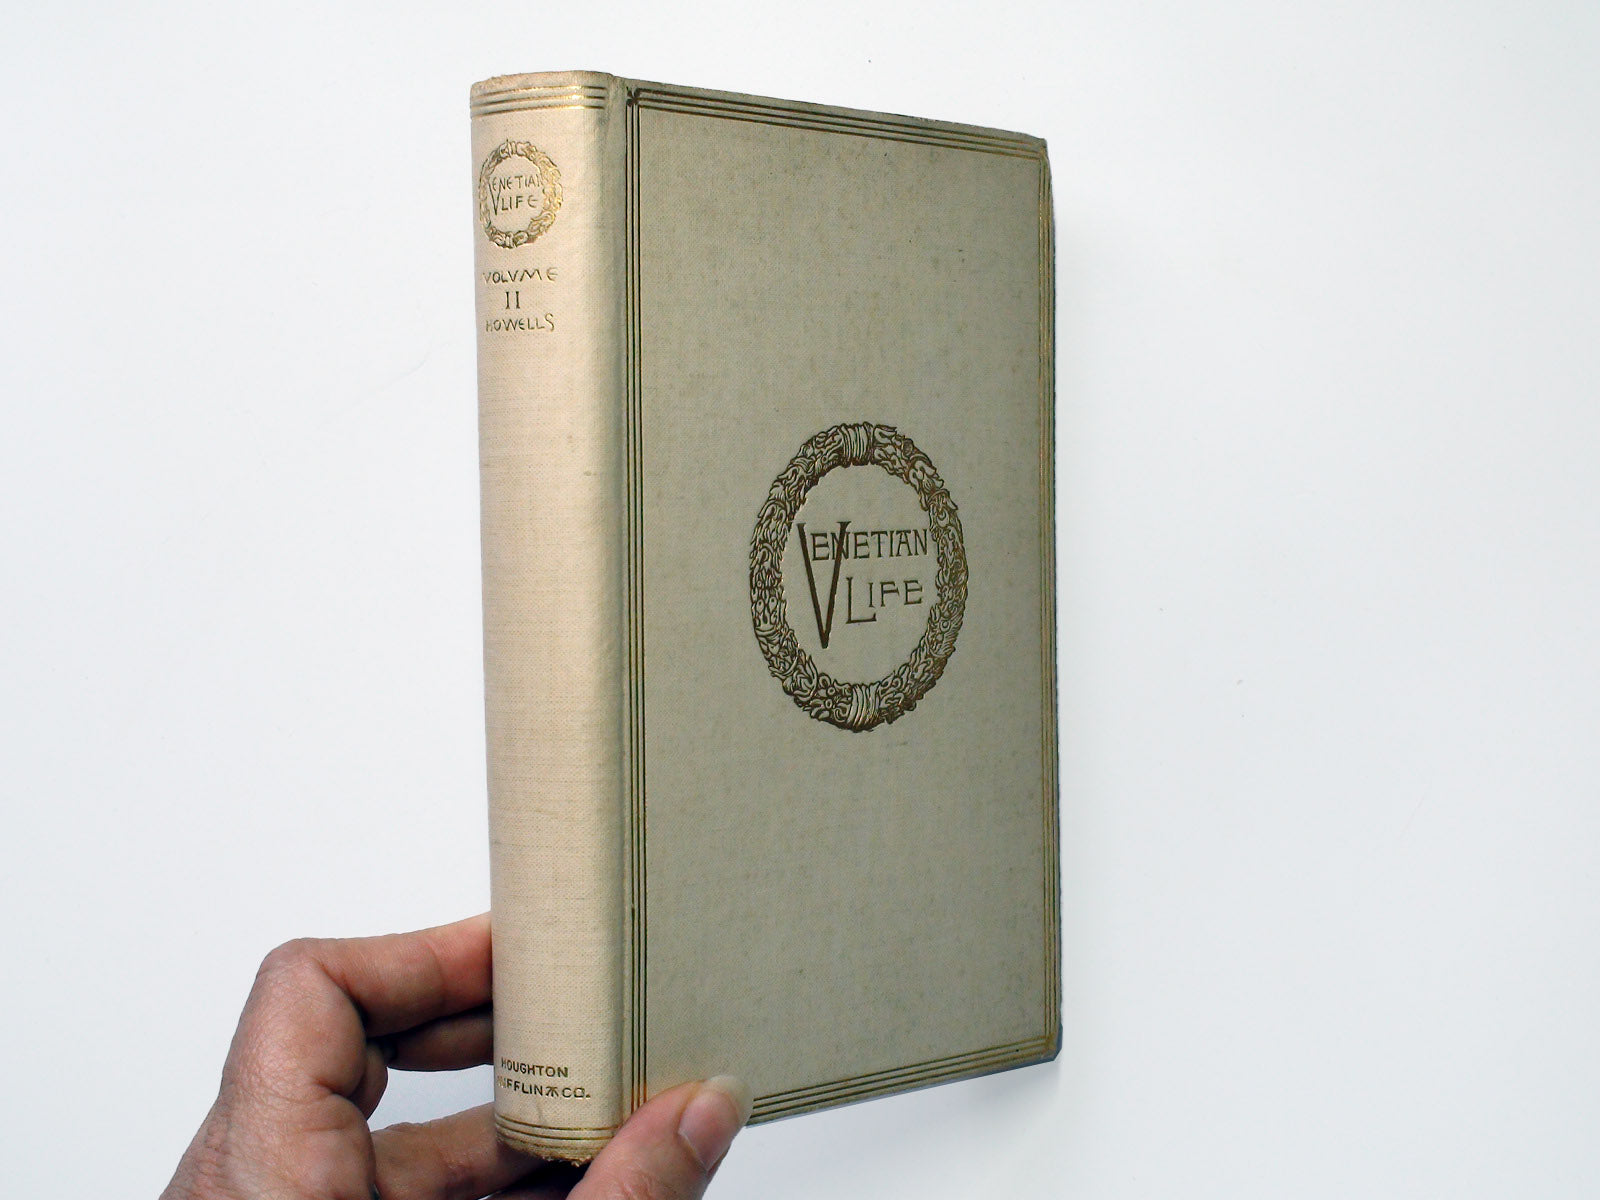 Venetian Life by William Dean Howells, Vol II Only, Illustrated, 1893